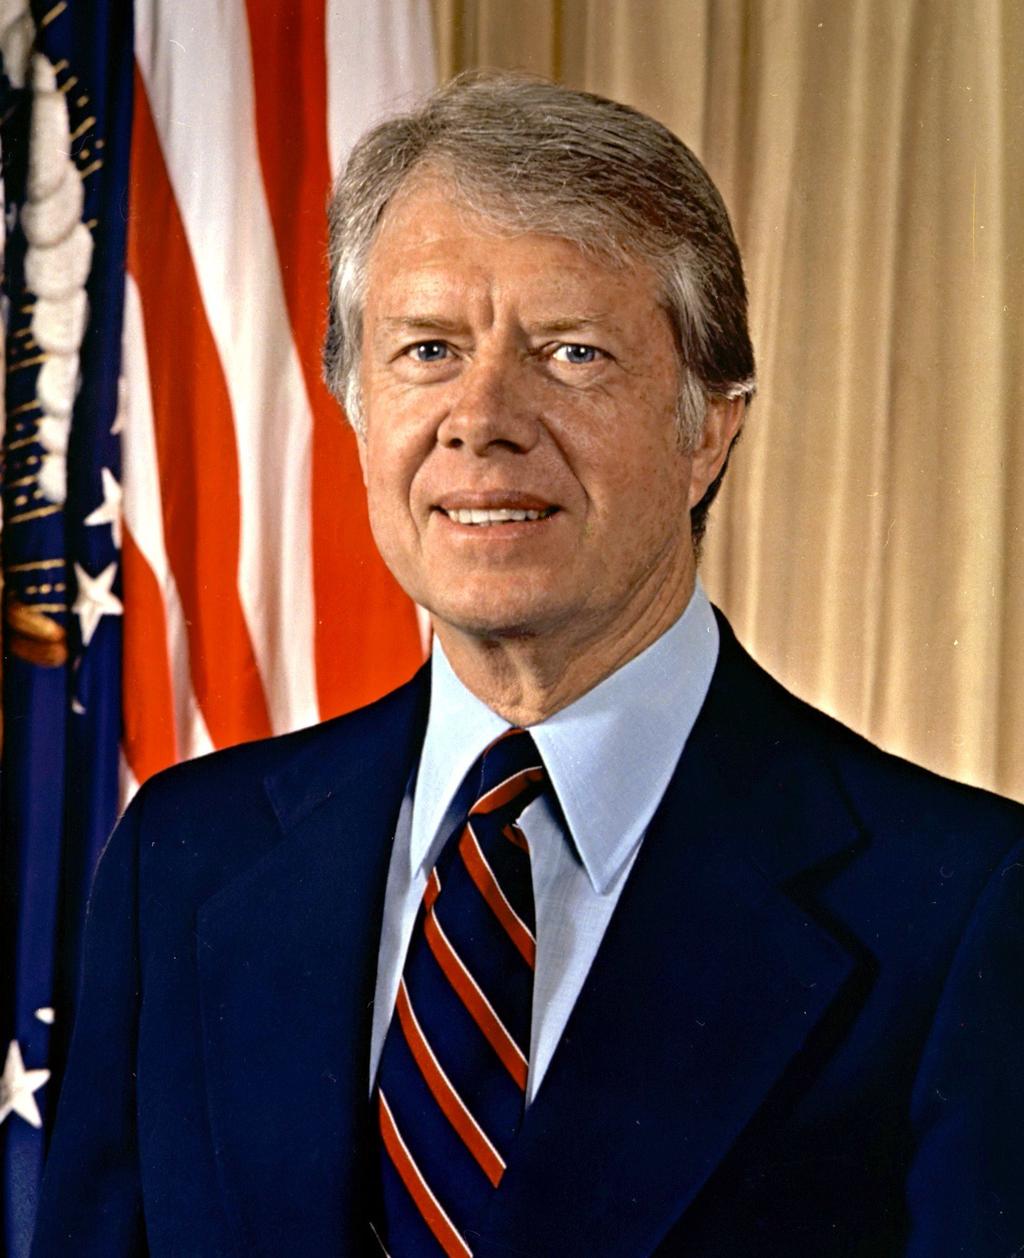 Carter s Latin America Policy President Jimmy Carter proclaimed a new approach for U.